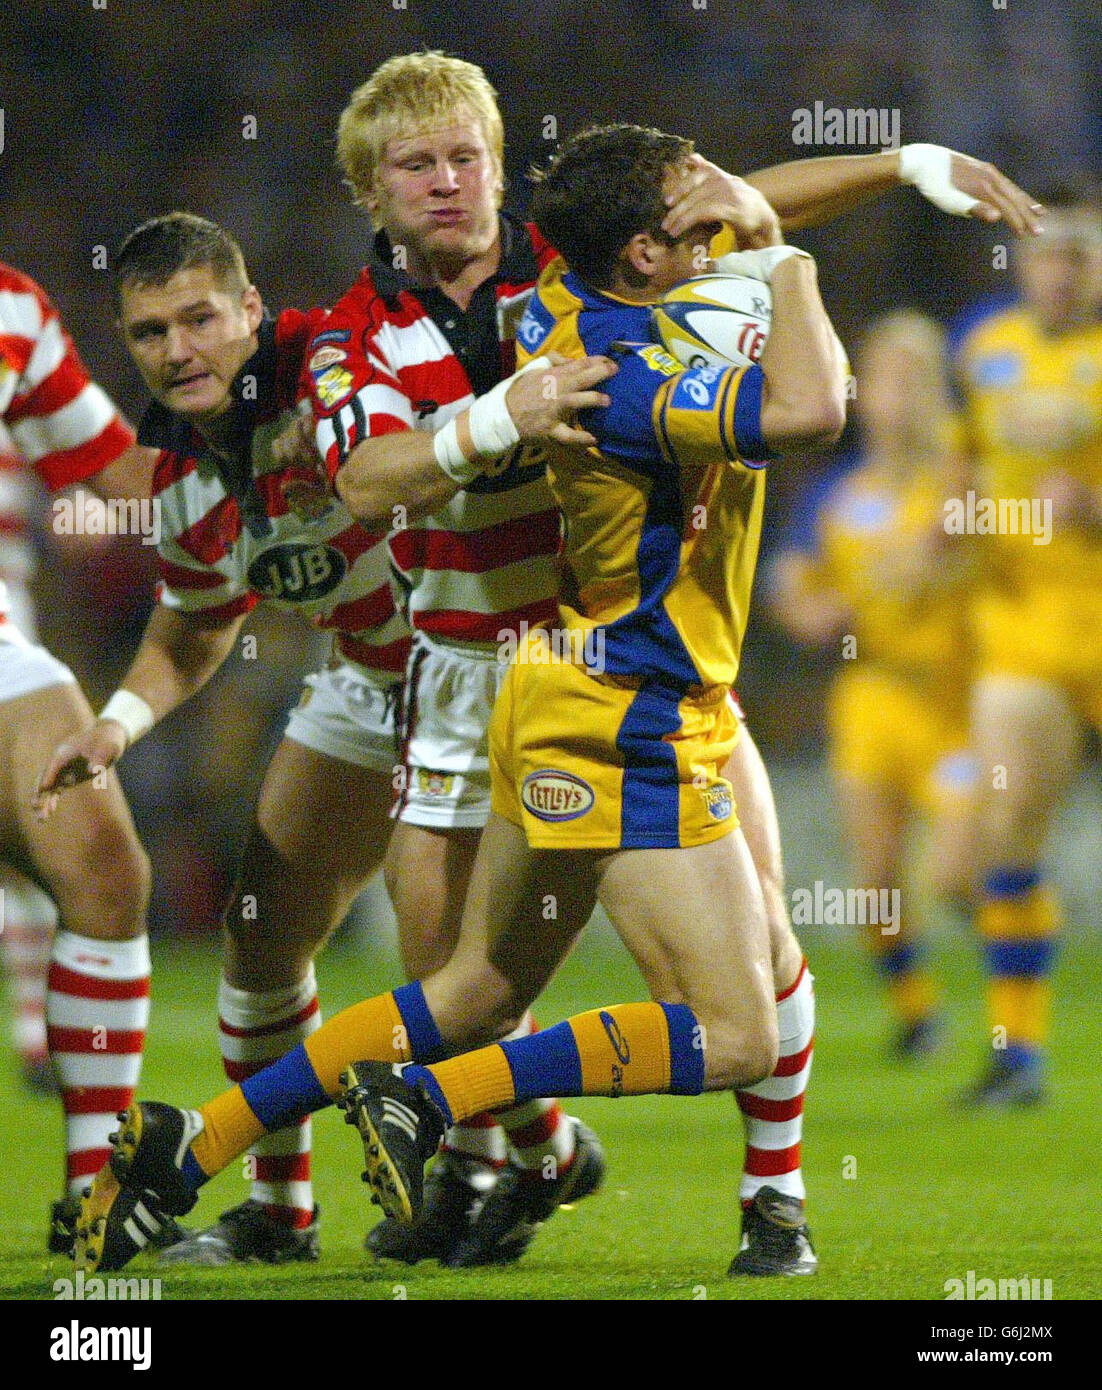 Leeds v Wigan. Leeds Rhinos Danny McGuire is tackled by Wigan Warriors Mick Cassidy, during their Tetleys Super League Semi-Final Eliminator. Stock Photo